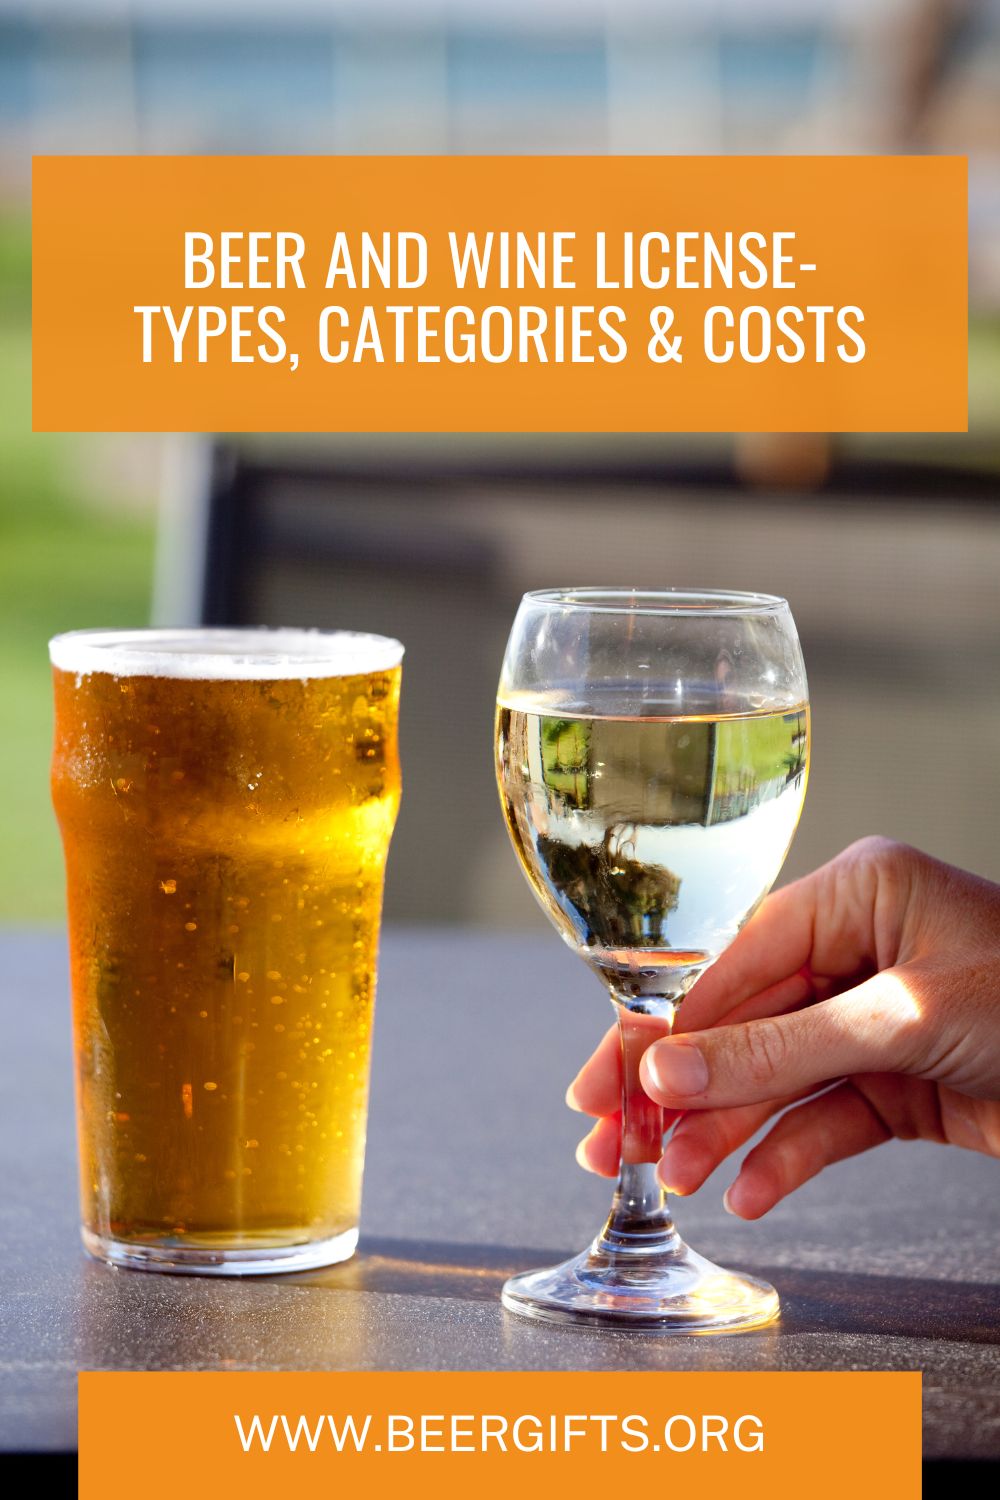 Beer and Wine License- Types, Categories & Costs 7